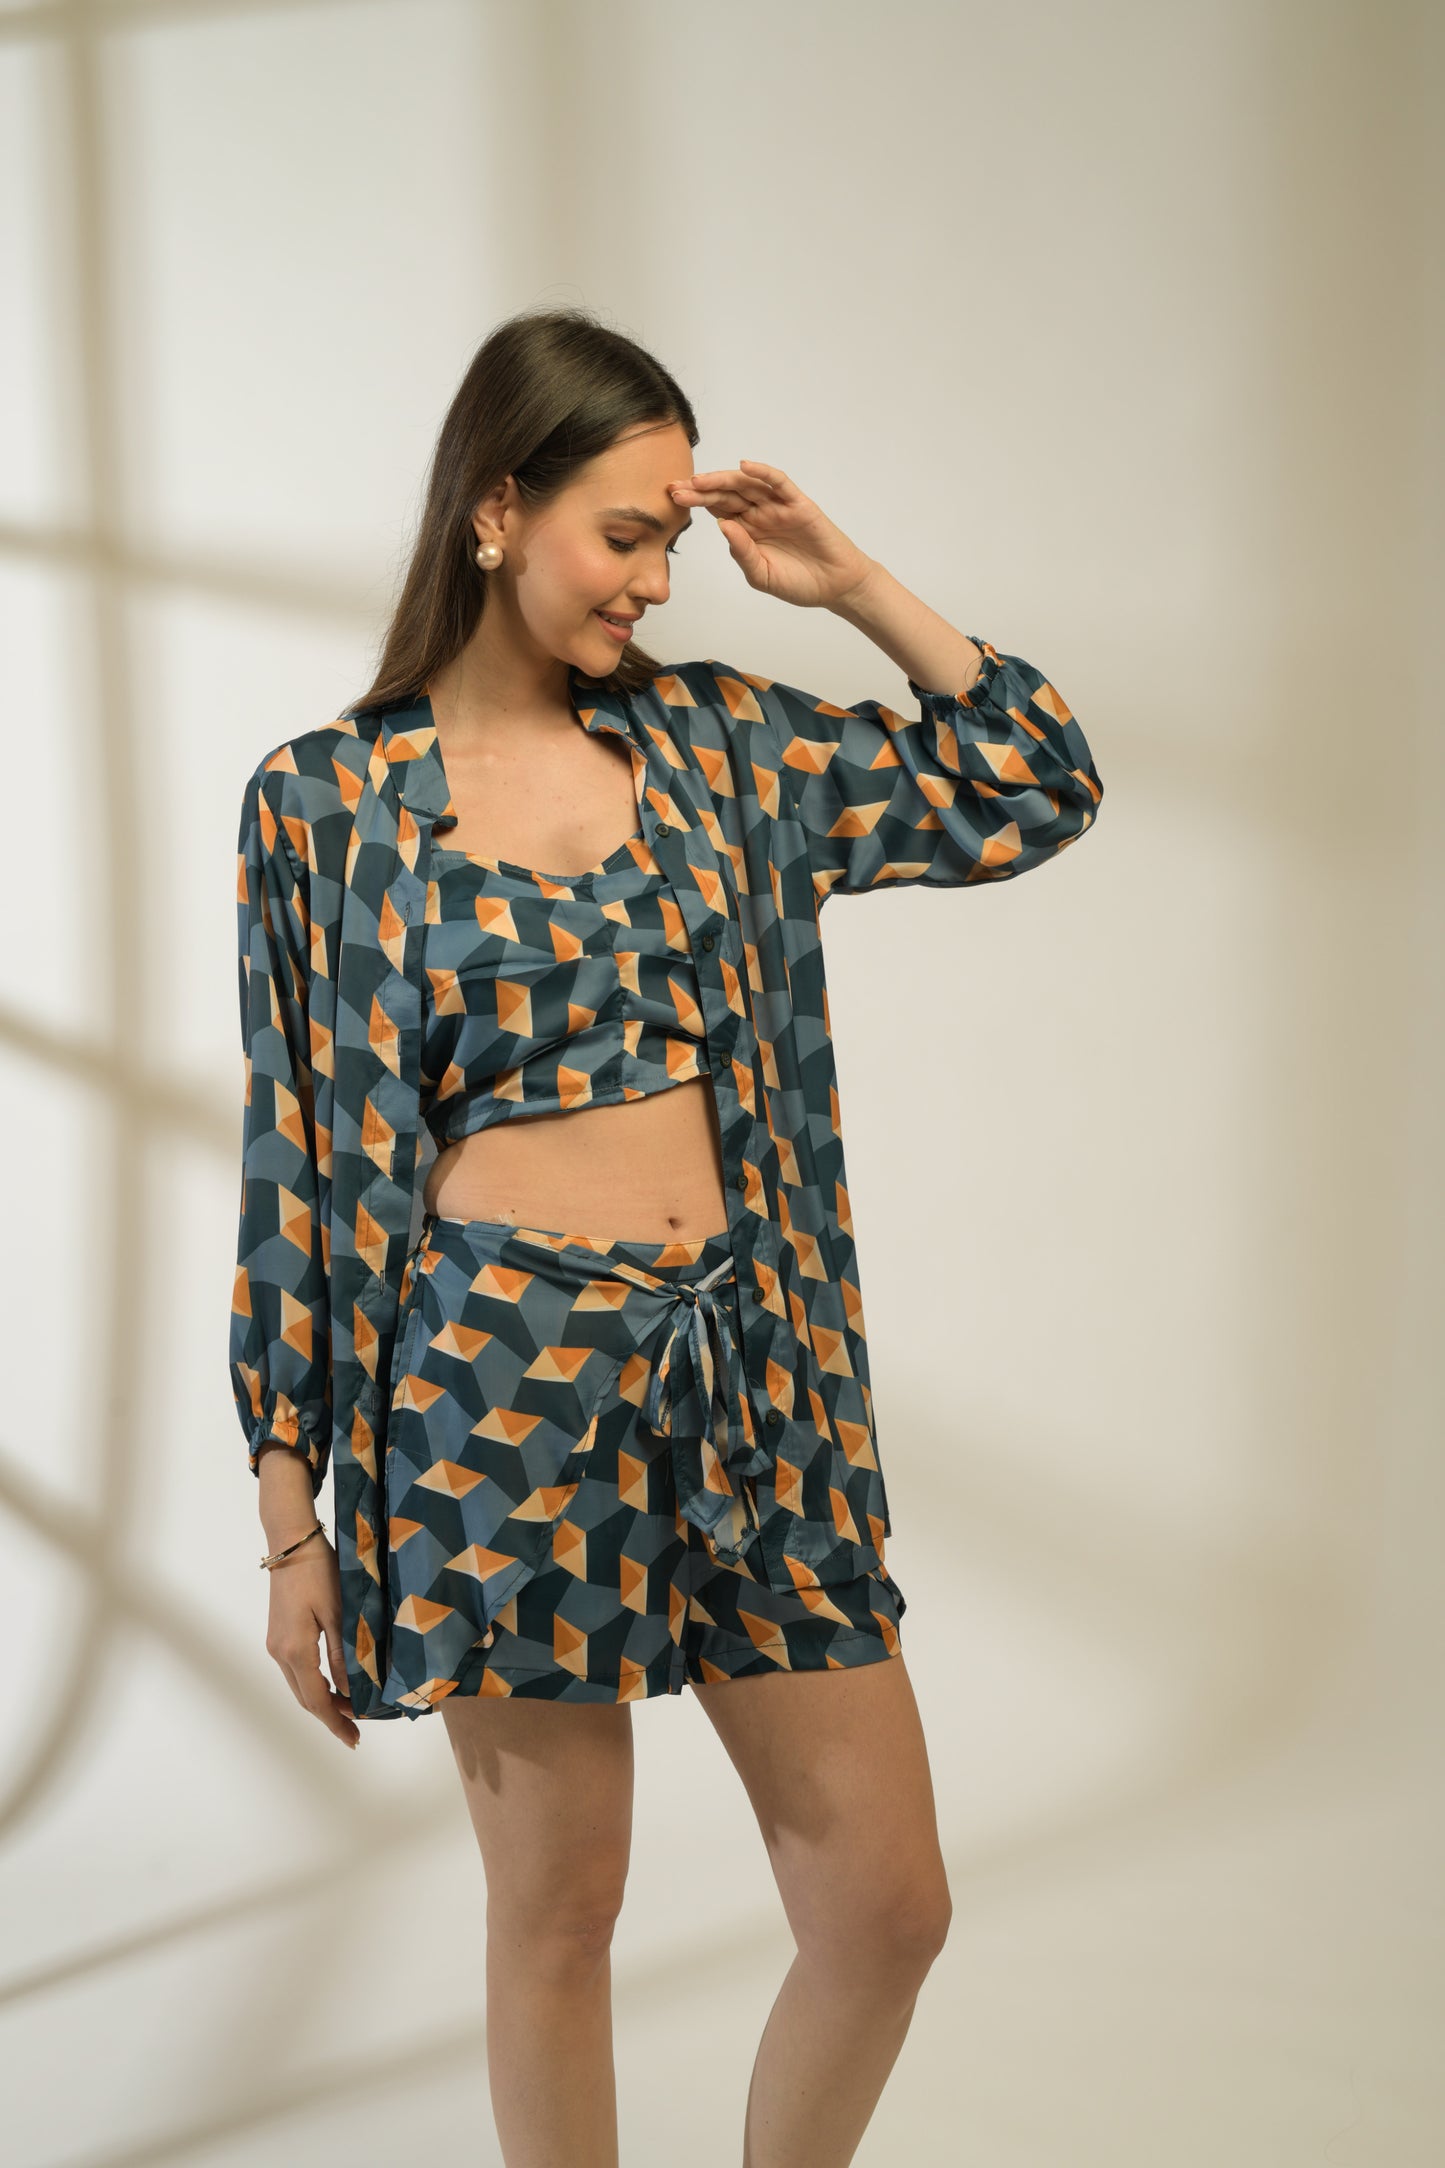 Stella Relaxed fit Shirt, Bustier with Tie Detailing Shorts in Printed Viscose Crepe - Set of 3